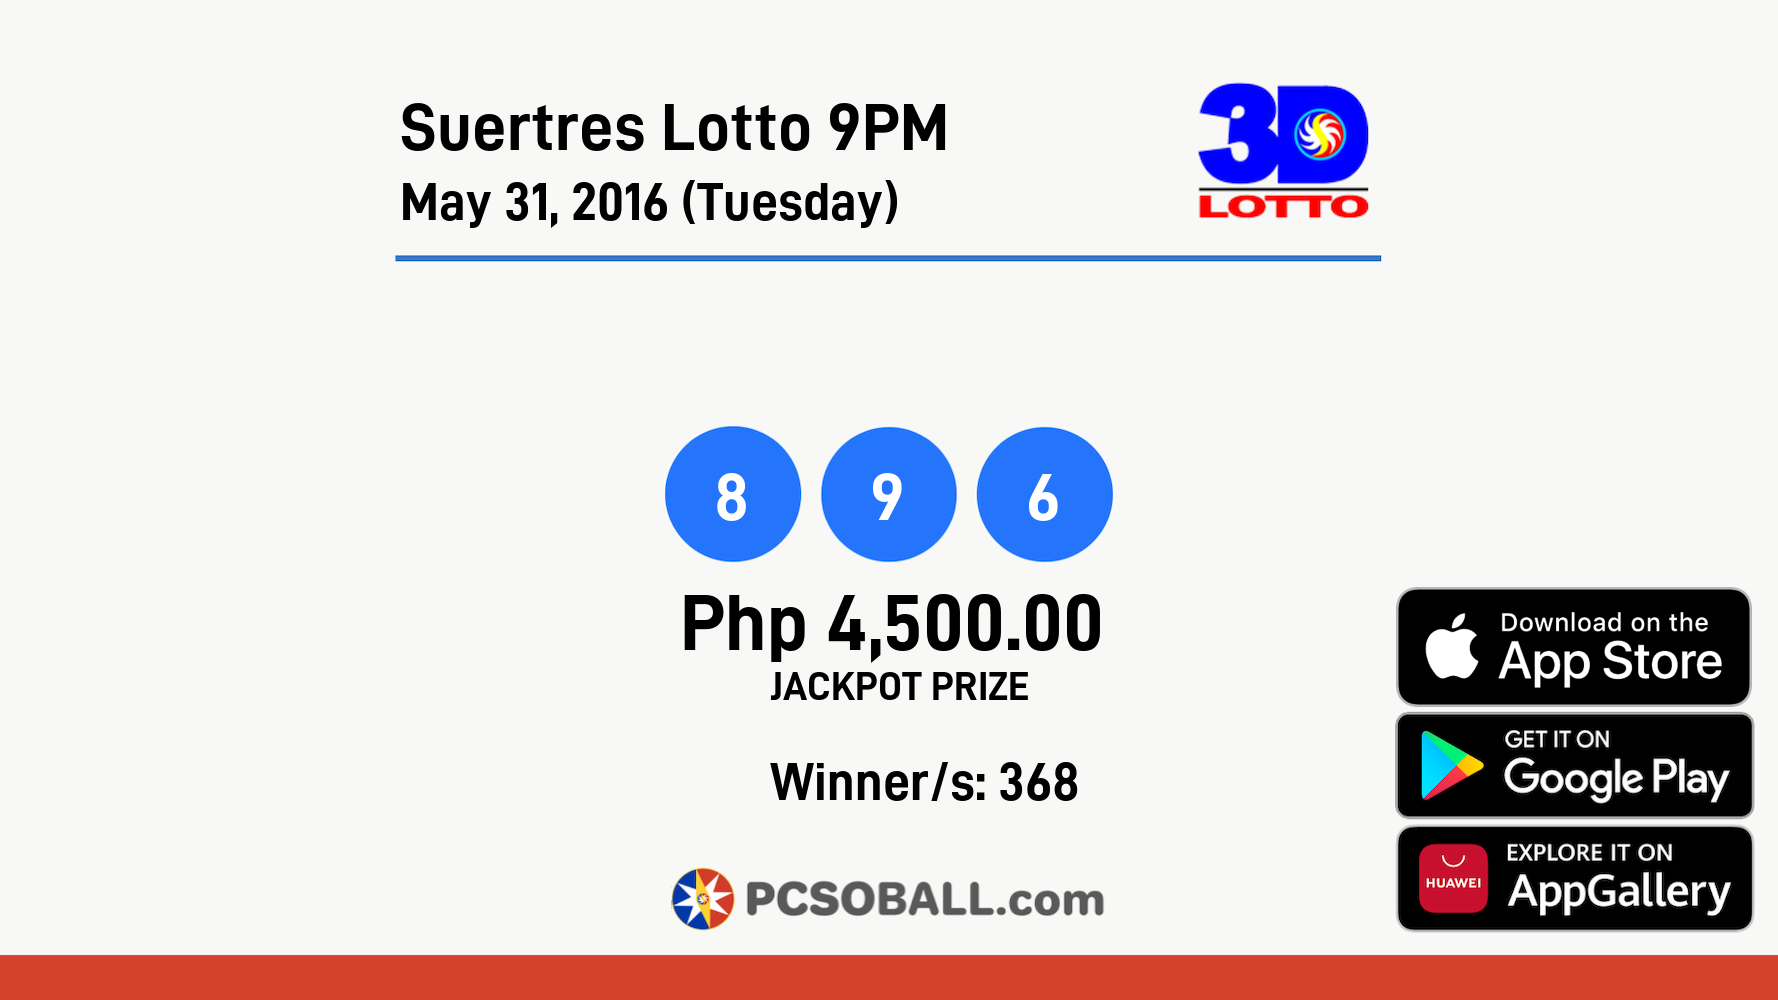 Suertres Lotto 9PM May 31, 2016 (Tuesday) Result